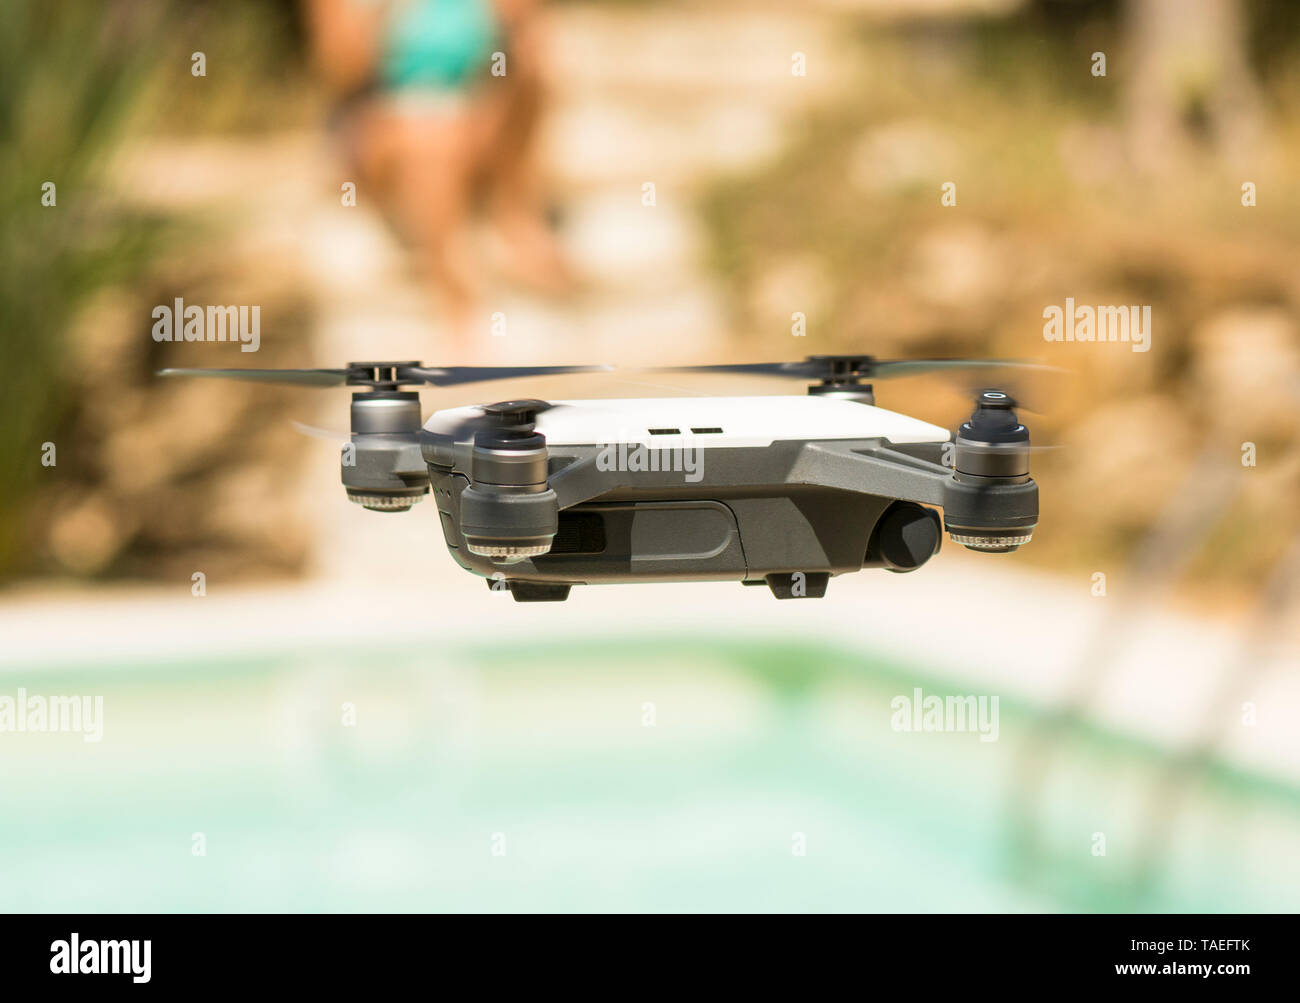 Drone copter, DJI Spark, flying next to pool, with high resolution digital camera, hovering in sky. Stock Photo